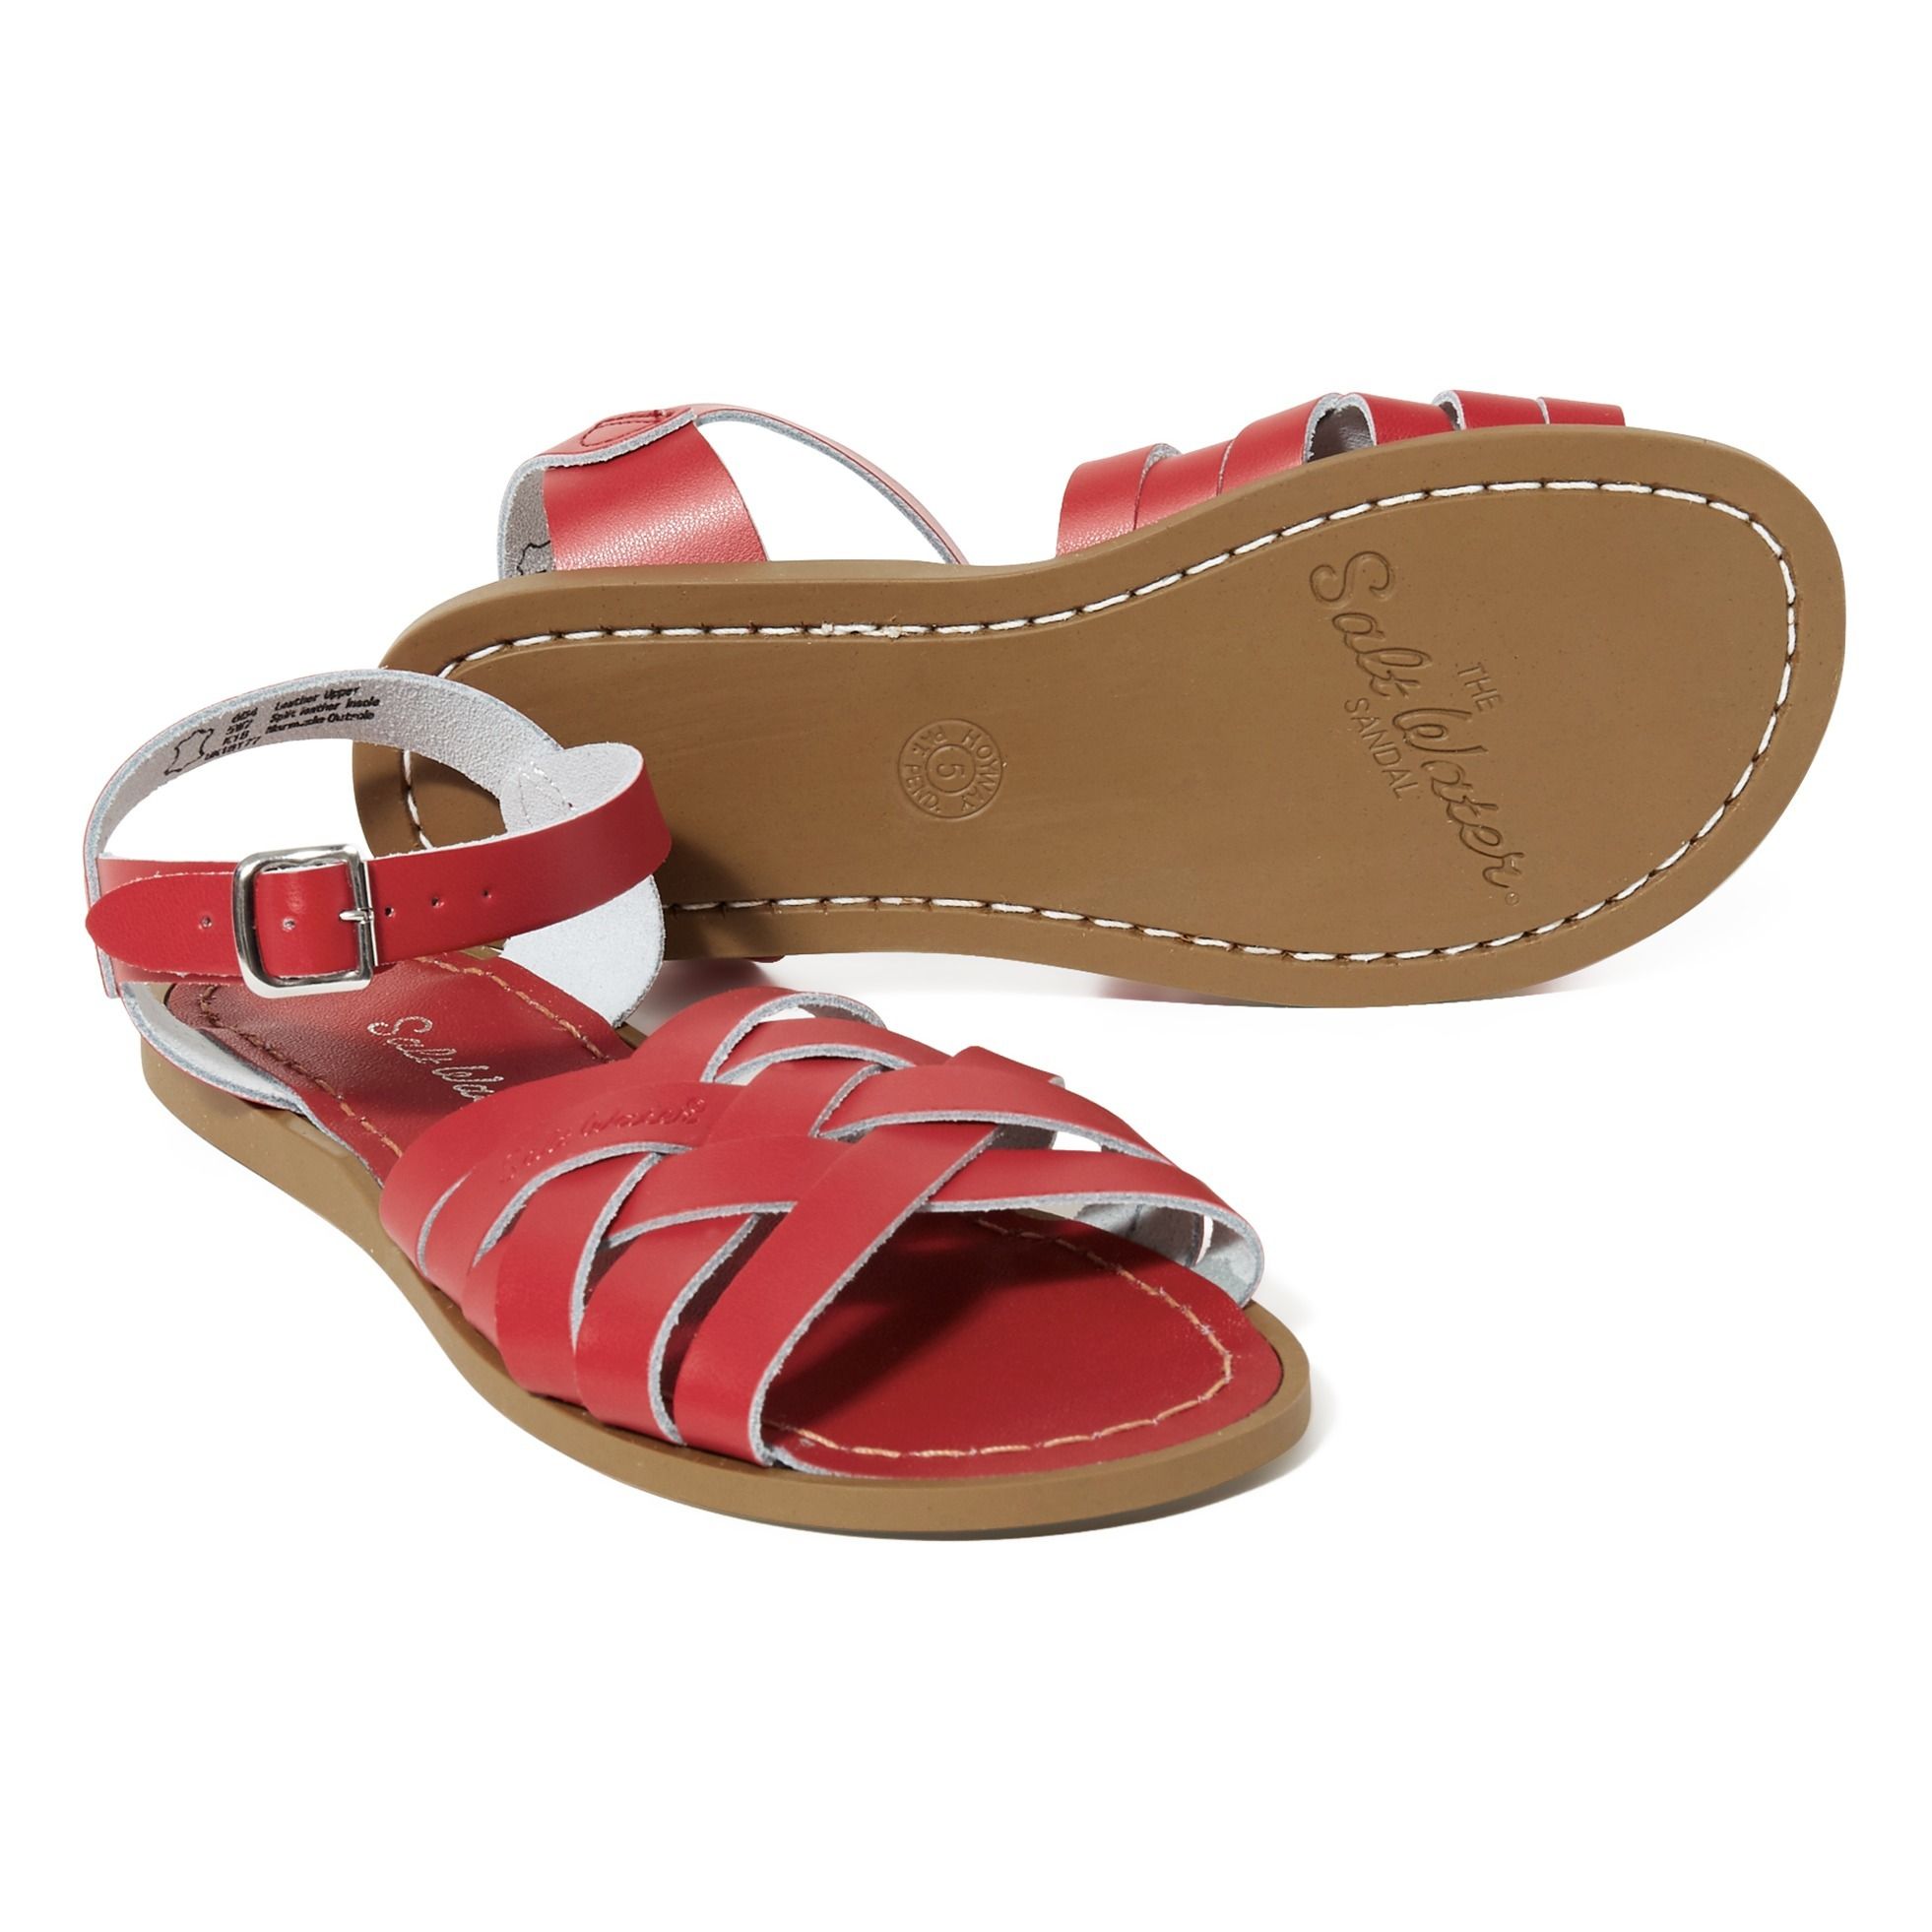 Retro Sandals - Women's Collection - Red Salt-Water Shoes Adult